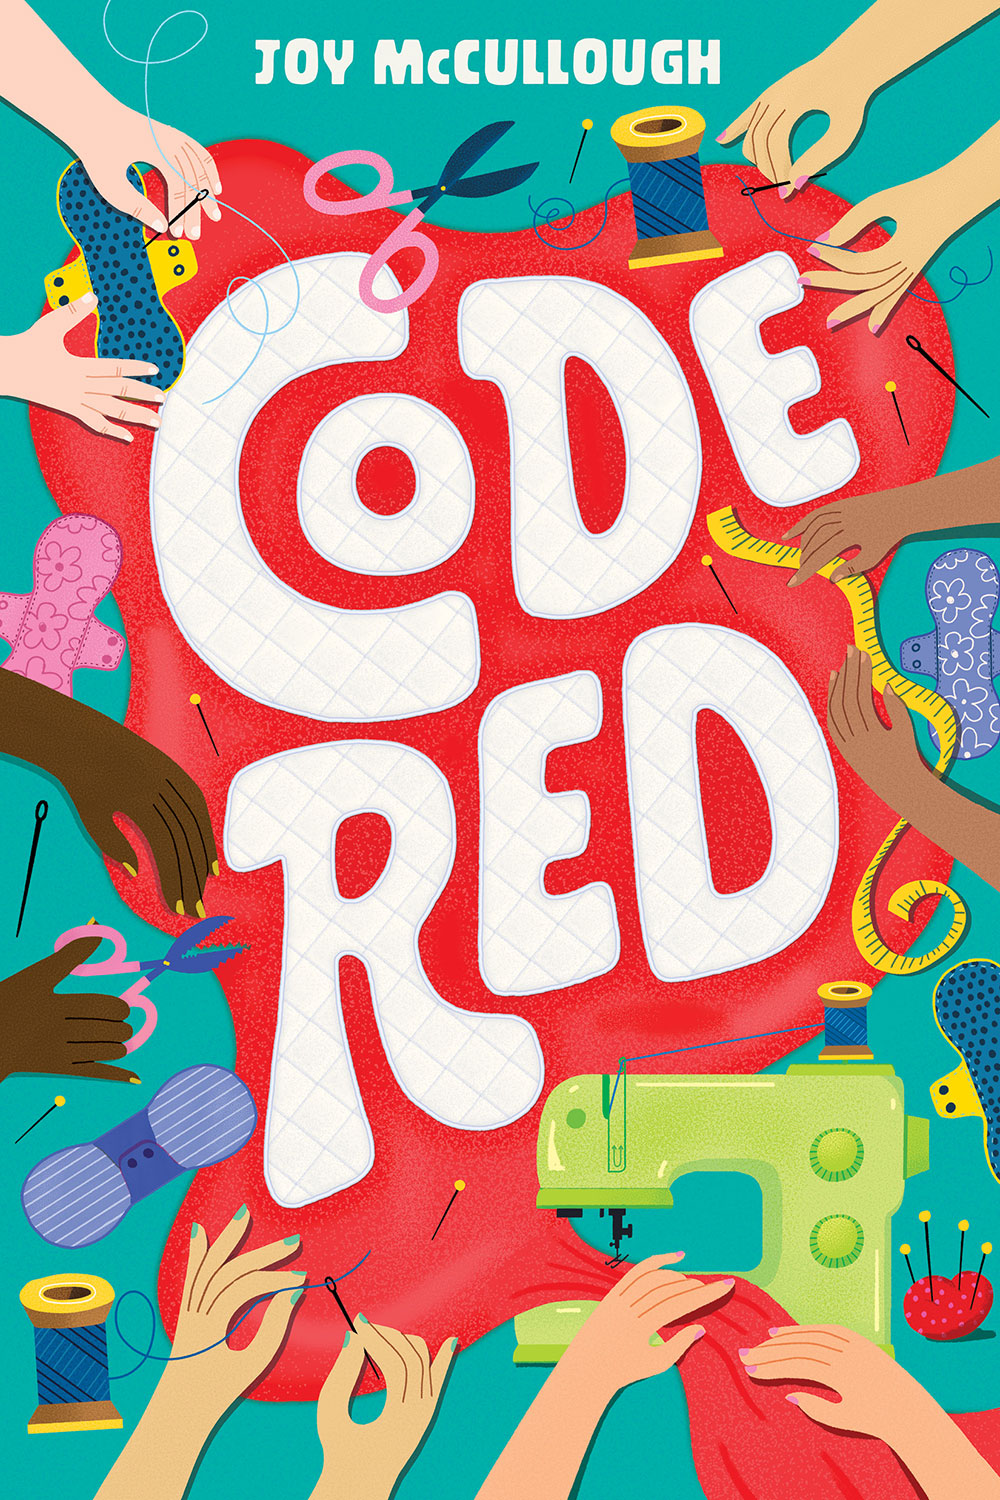 Book cover for Code Red by Joy McCullough